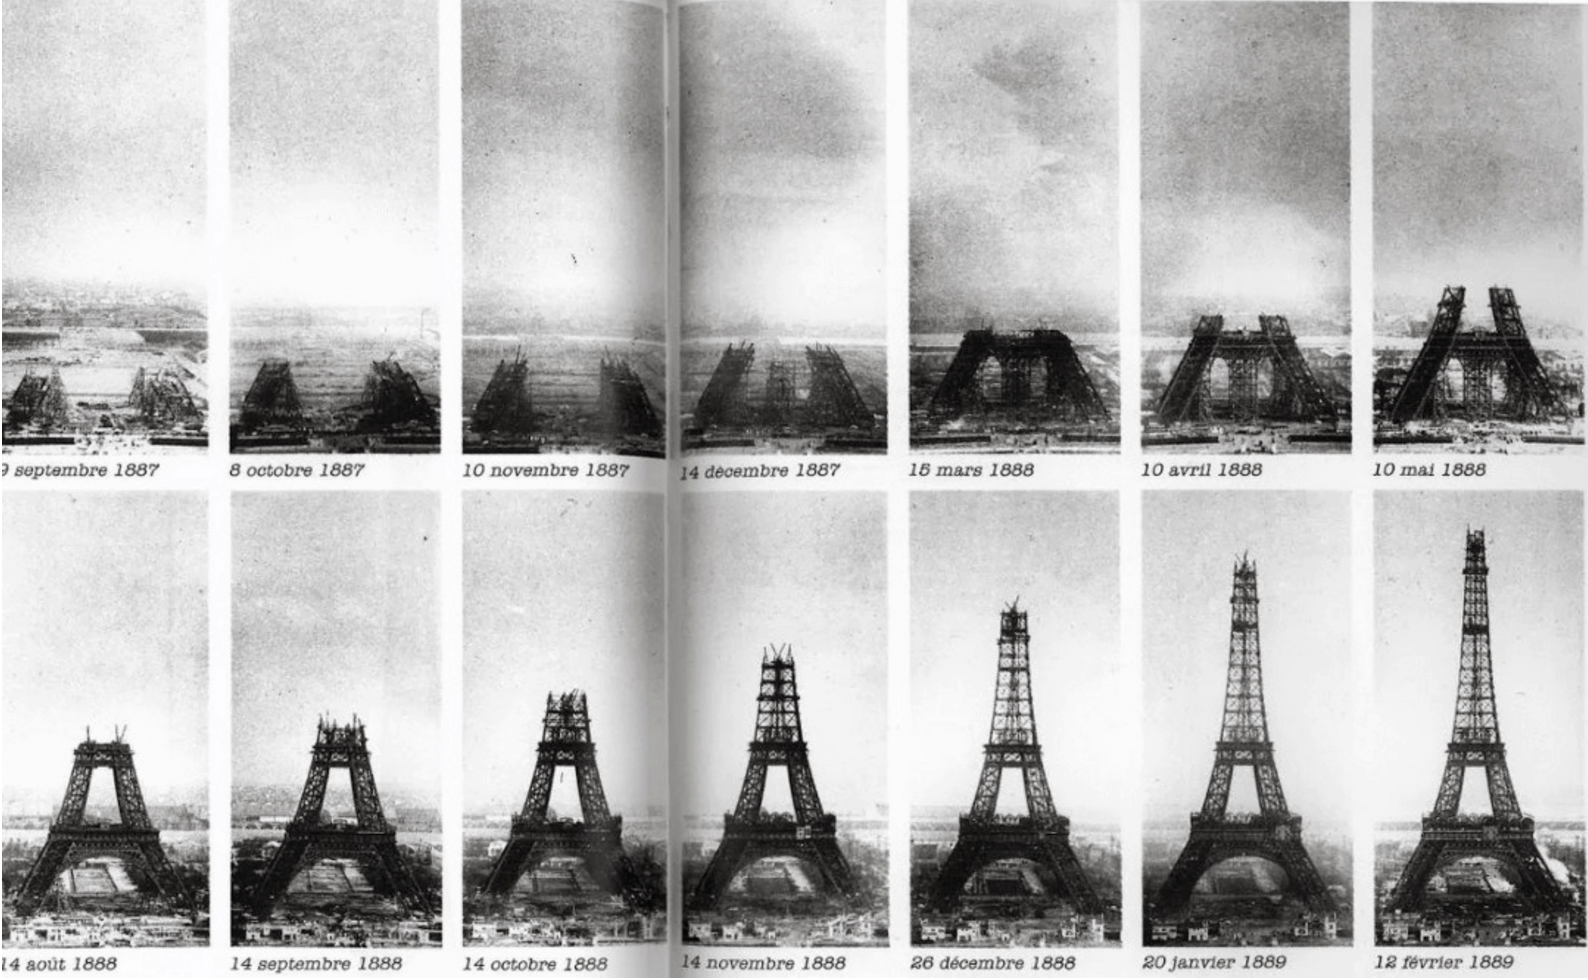 Eiffel Tower construction during 1889 World's Fair, courtesy of Public Domain Archive